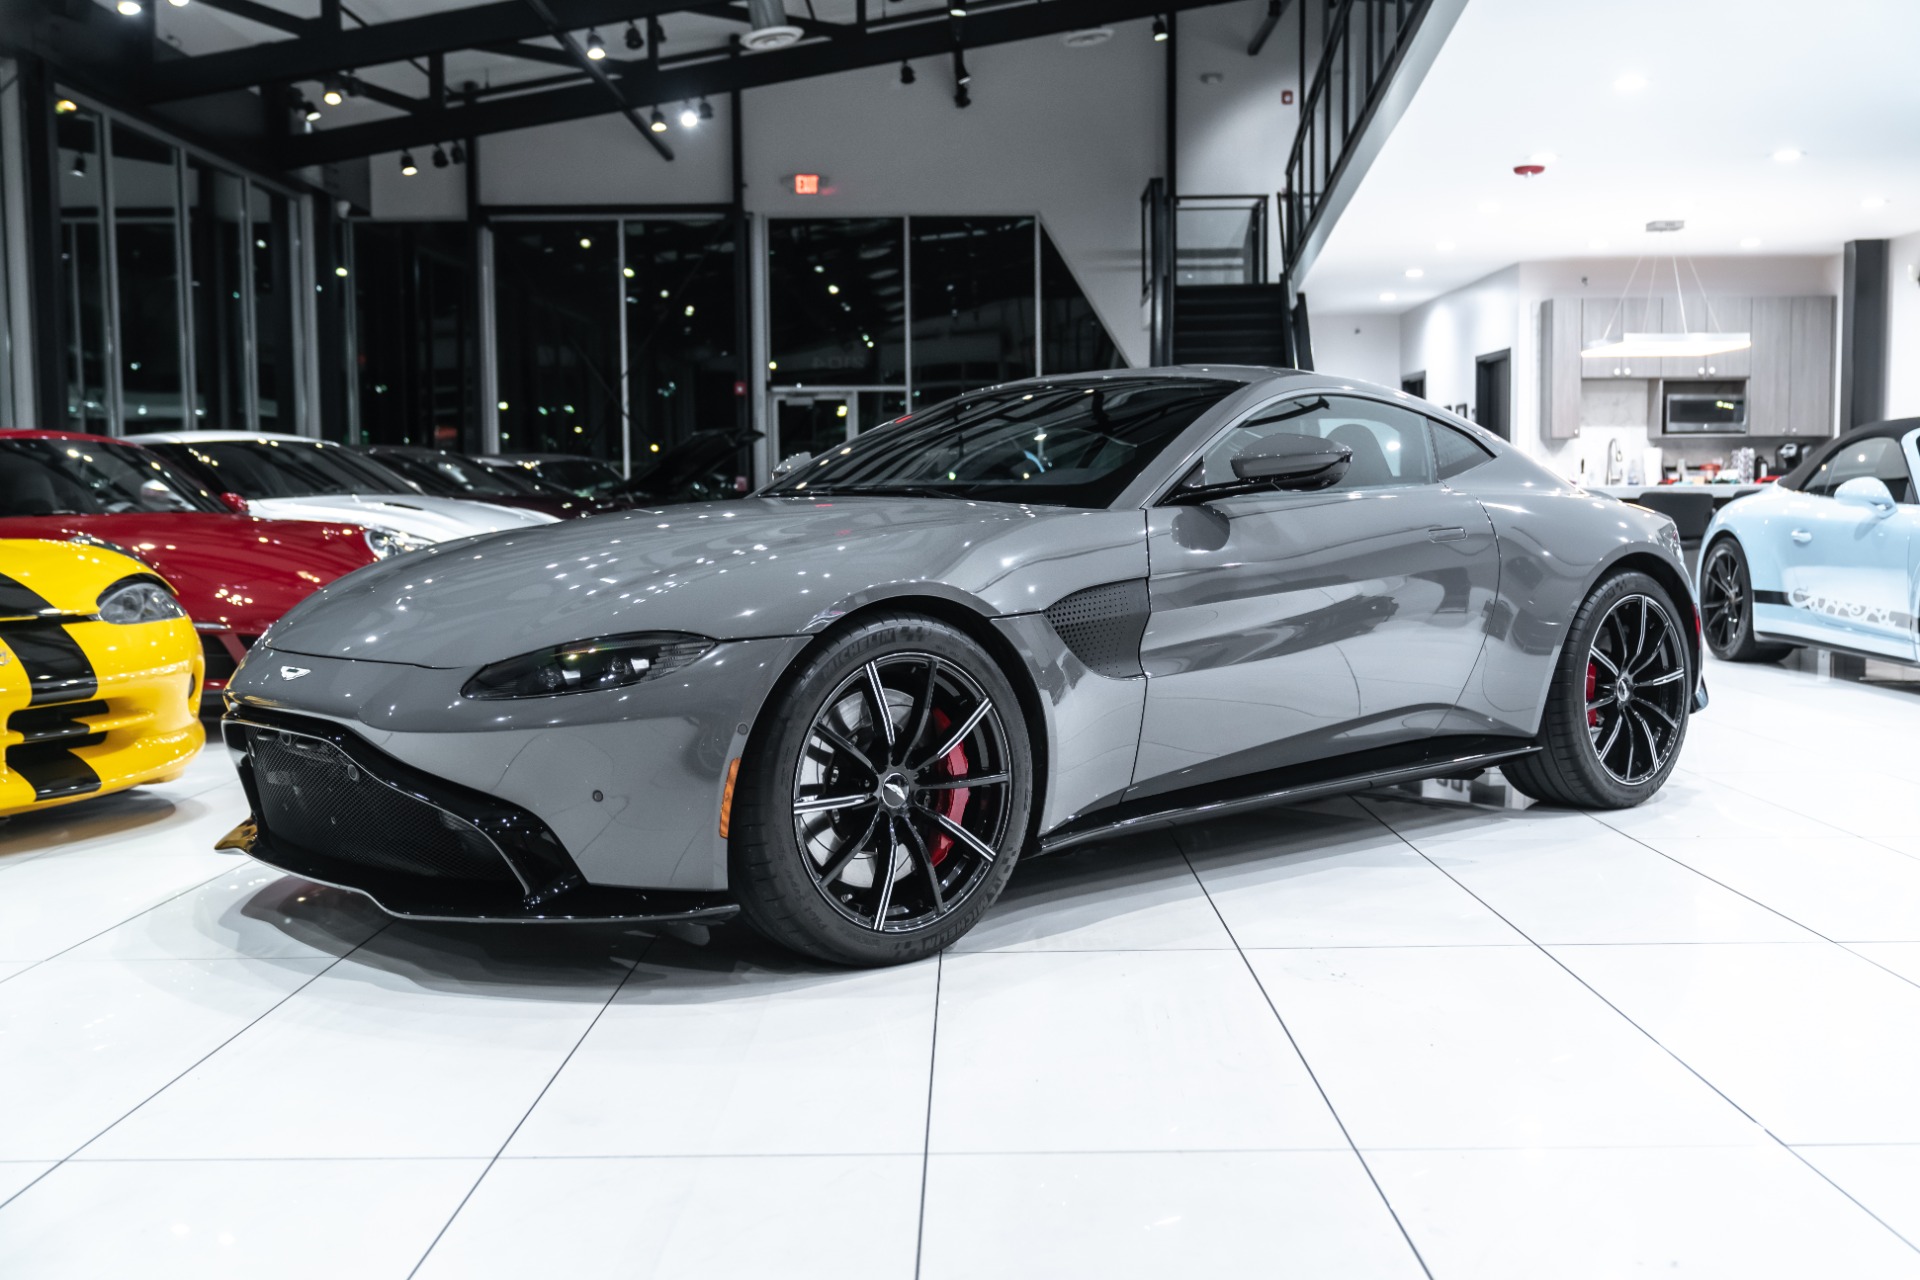 Used-2019-Aston-Martin-Vantage-V8-Beautiful-Color-Recent-Service-New-Tires